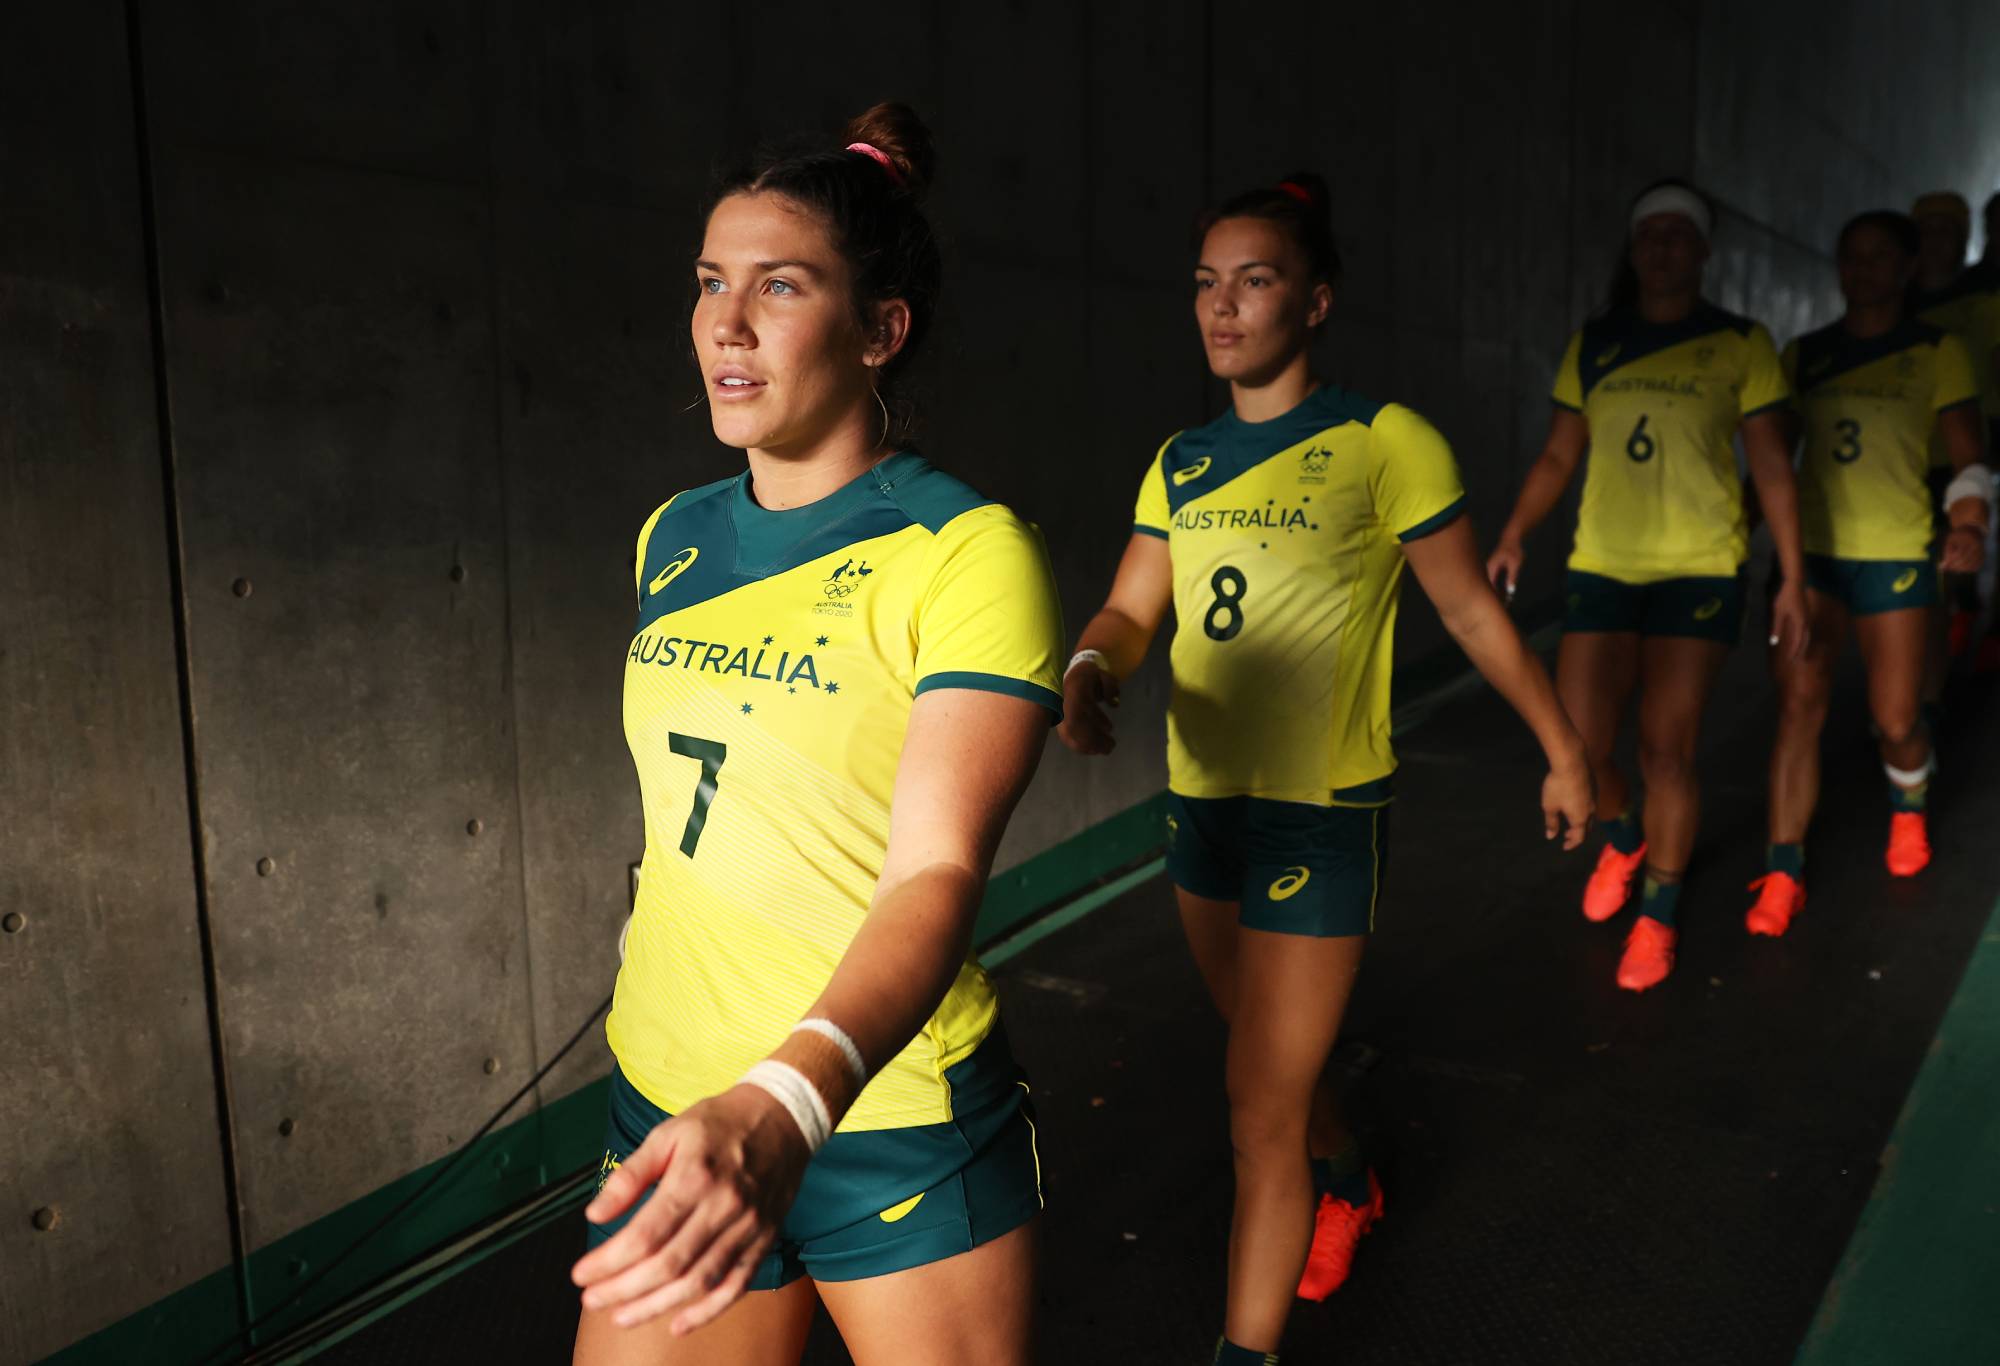 Charlotte Caslick of Team Australia prepares to take the field with team mates in the Women’s Placing 5-6 match between Team Australia and Team United States during the Rugby Sevens on day eight of the Tokyo 2020 Olympic Games at Tokyo Stadium on July 31, 2021 in Chofu, Tokyo, Japan. (Photo by Dan Mullan/Getty Images)